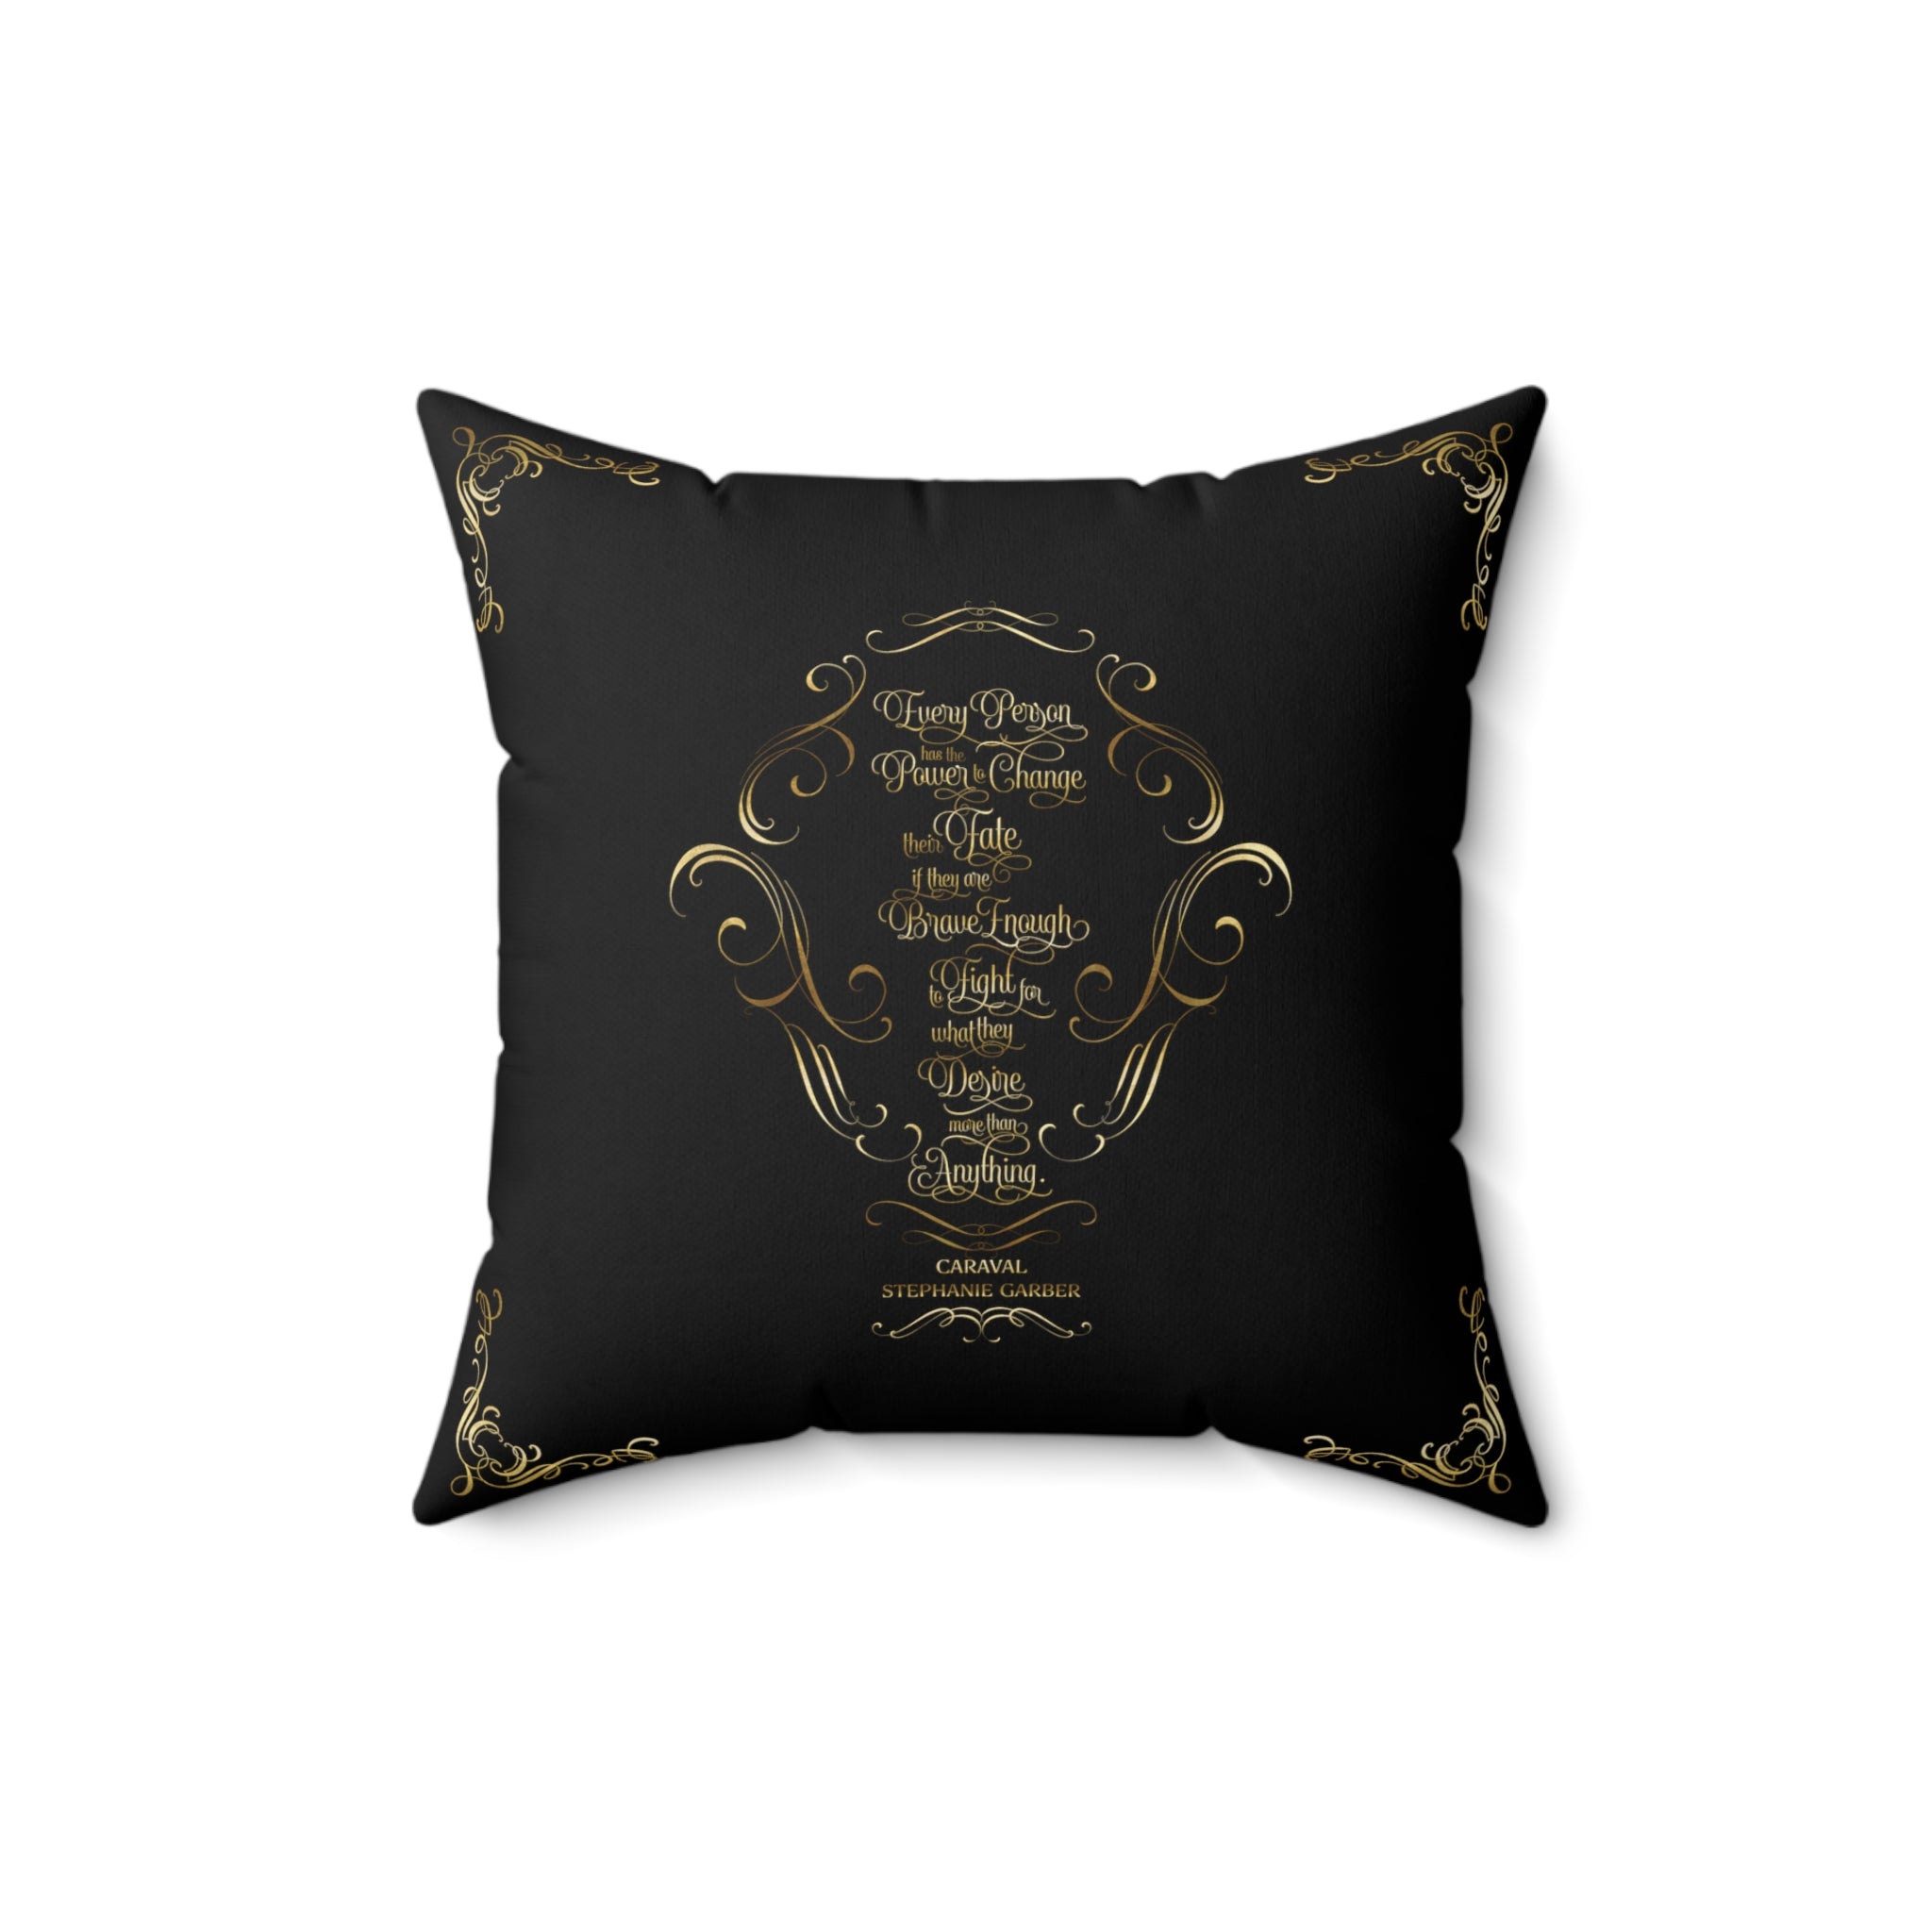 The Power to Change Fate. Caraval Pillow